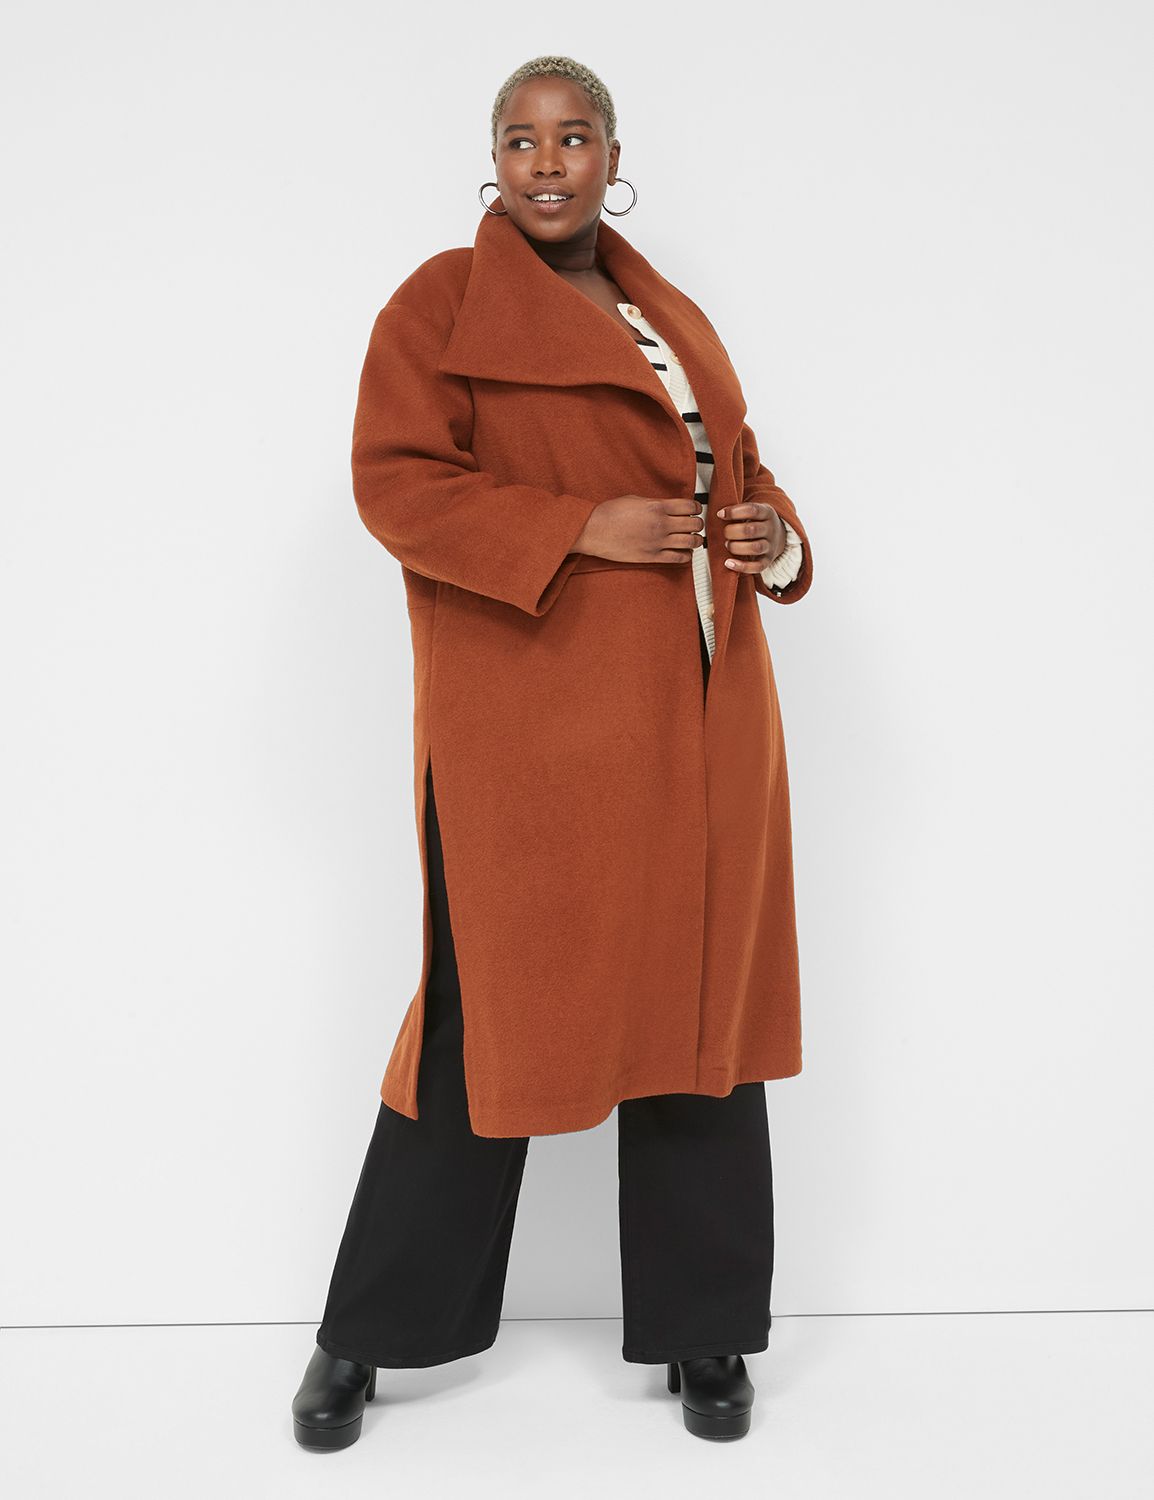 Clearance Plus Size Jackets & Coats - On Sale Today